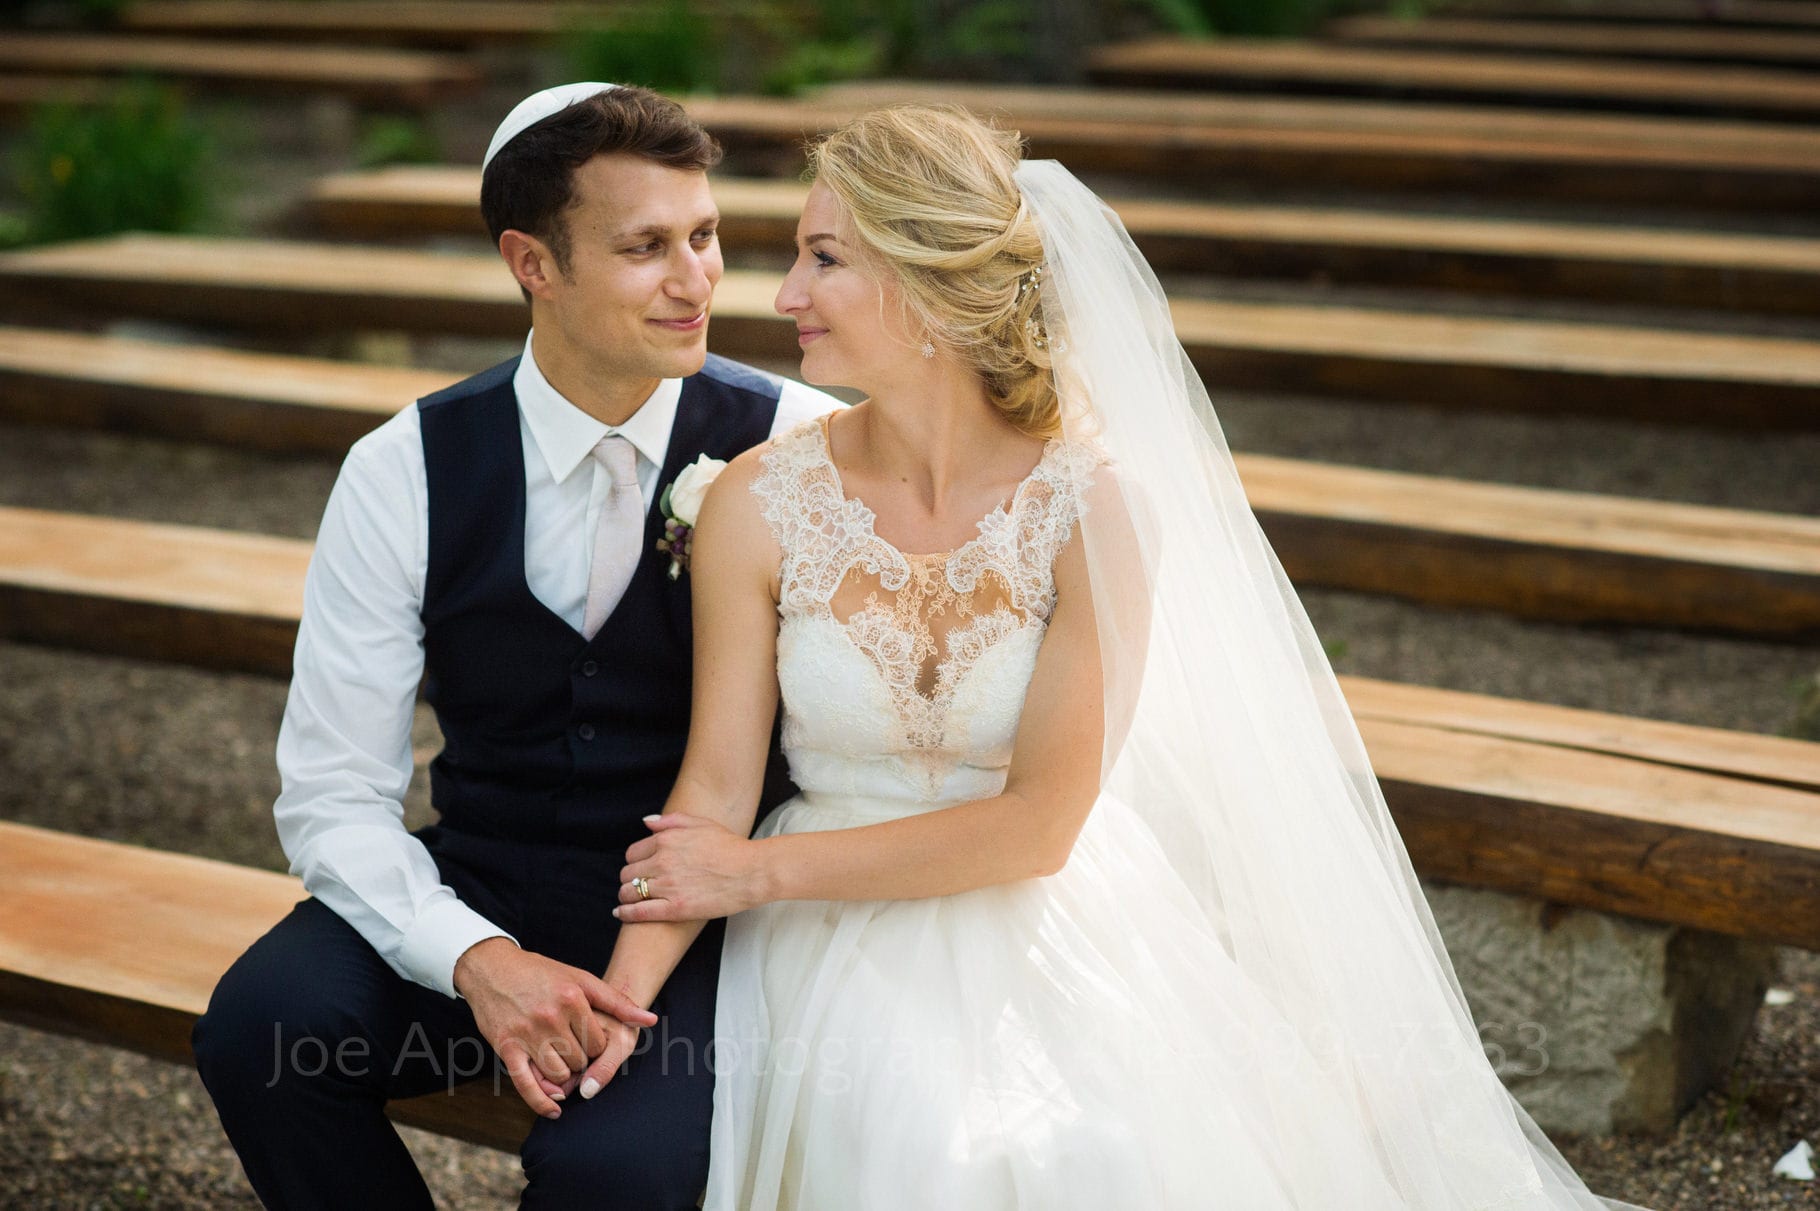 Portrait of a bride and groom smiling as they sit together on rough sawn wooden benches during their Seven Springs Wedding.